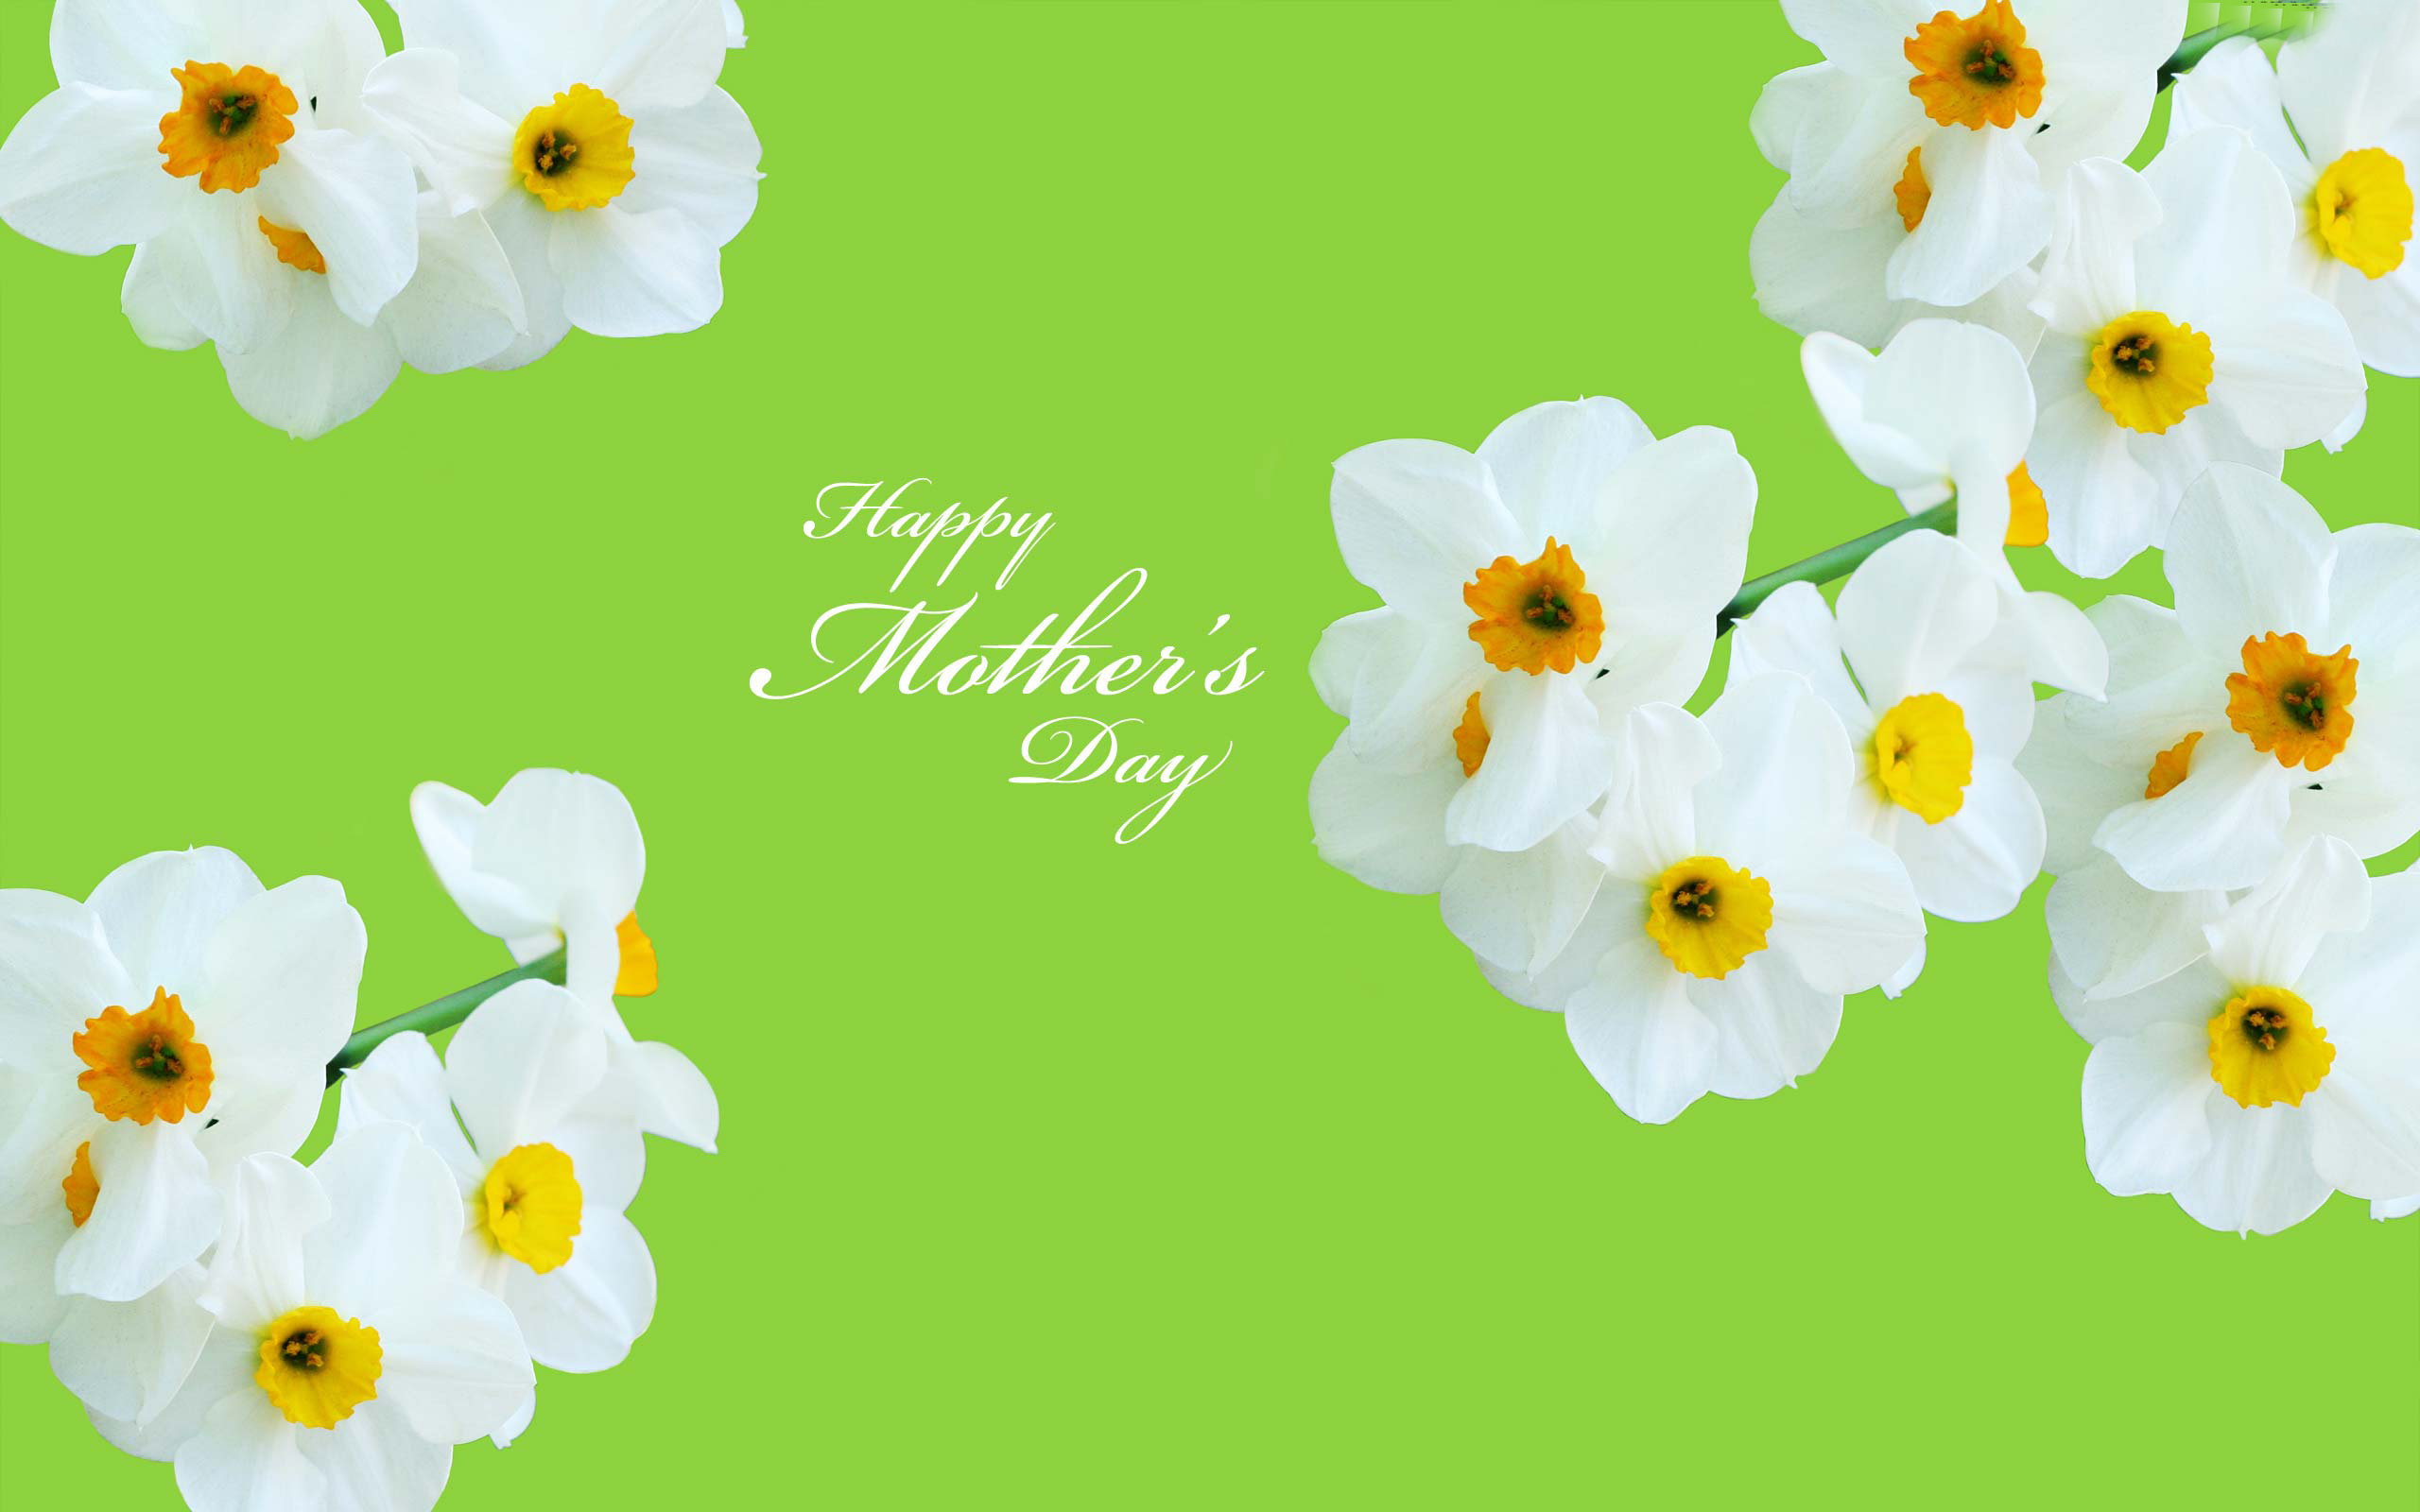 Happy Mothers Day HD Image Wallpaper